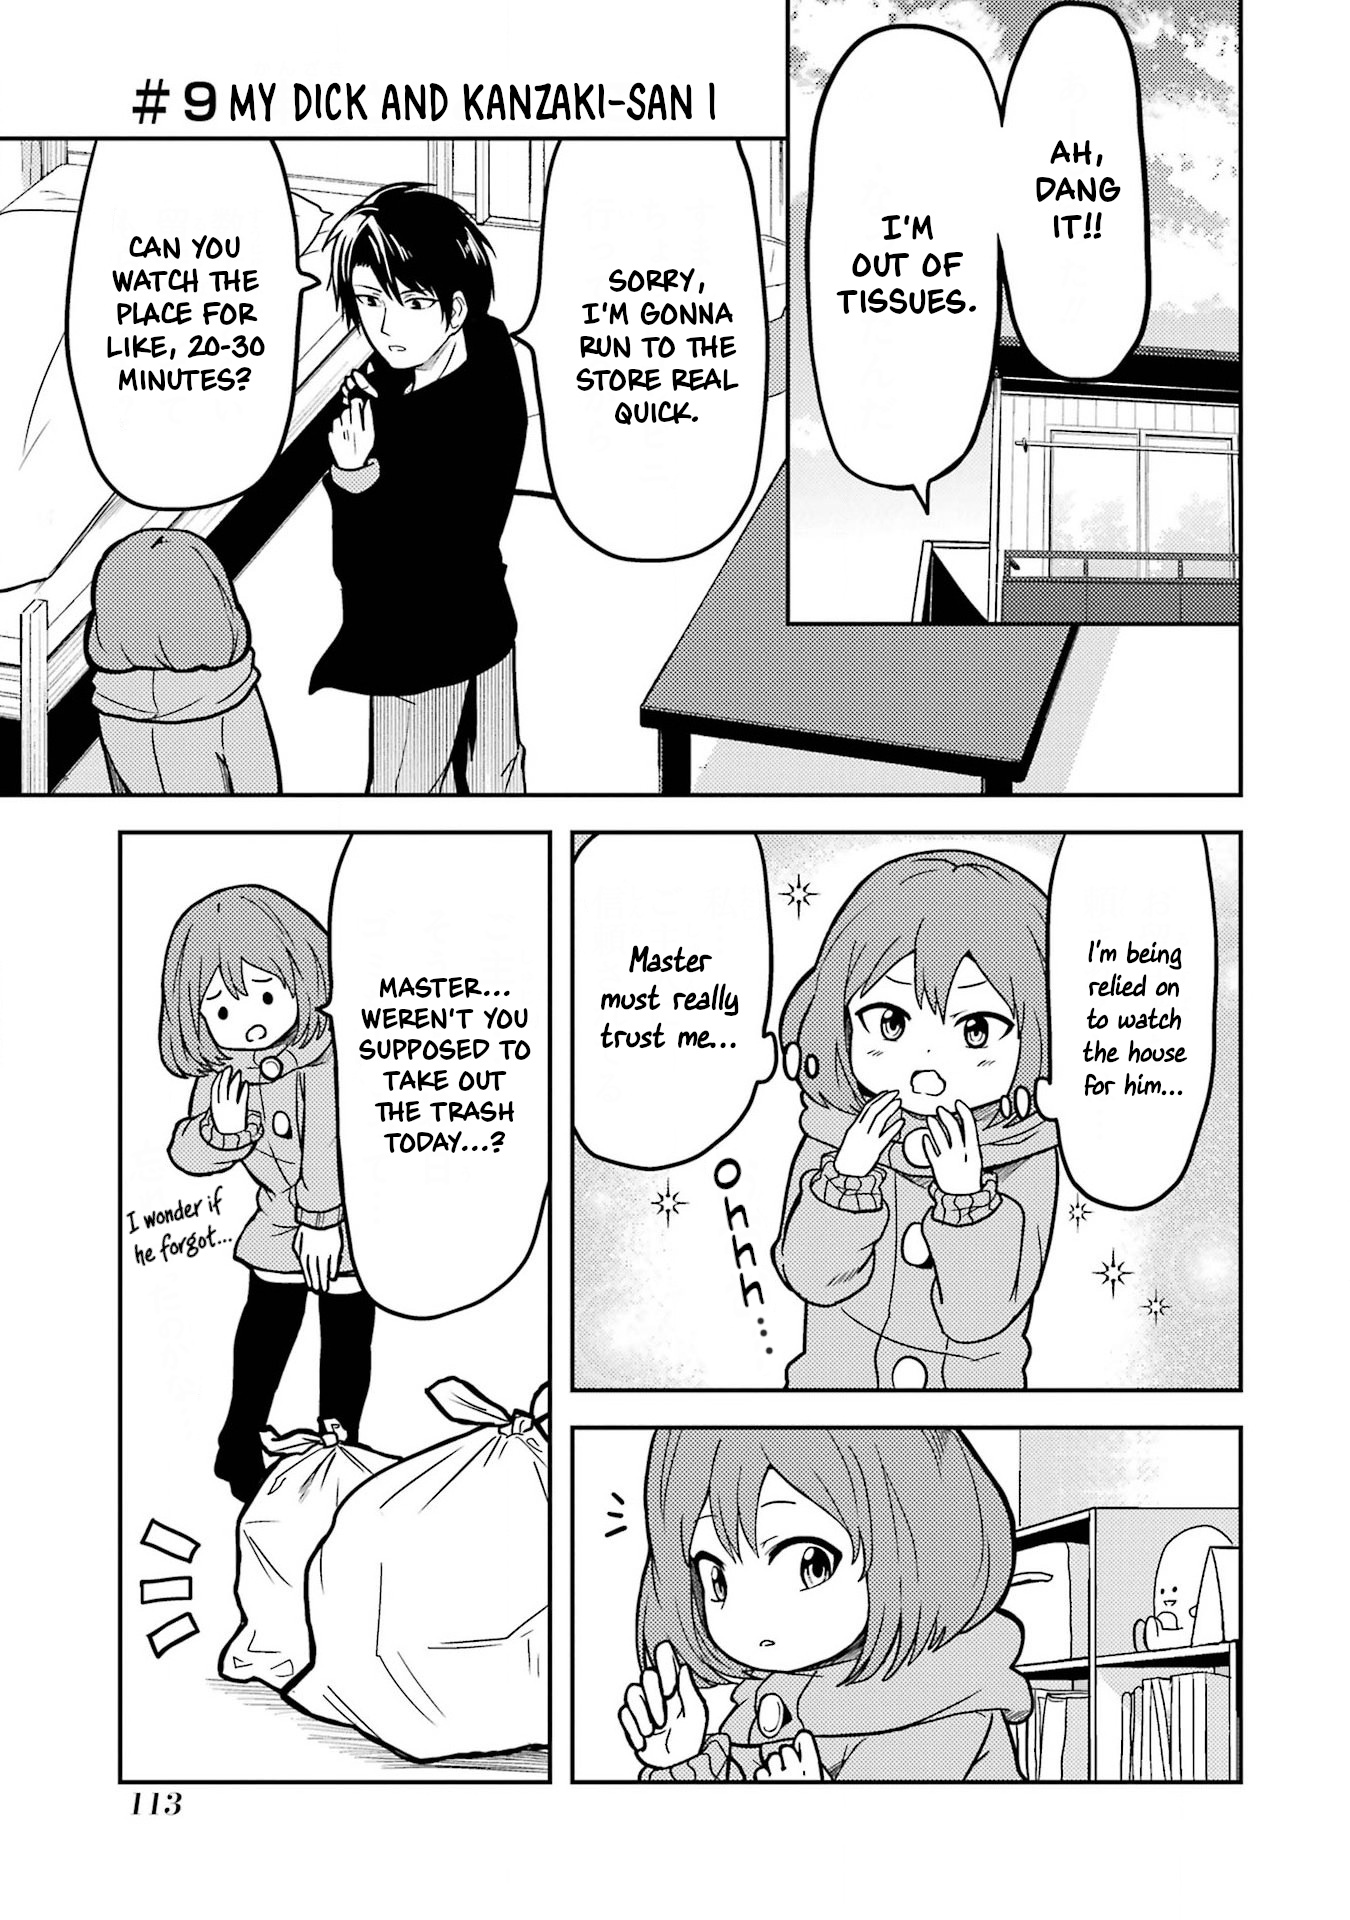 Turns Out My Dick Was A Cute Girl Vol.1 Chapter 9: My Dick And Kanzaki-San 1 - Picture 1